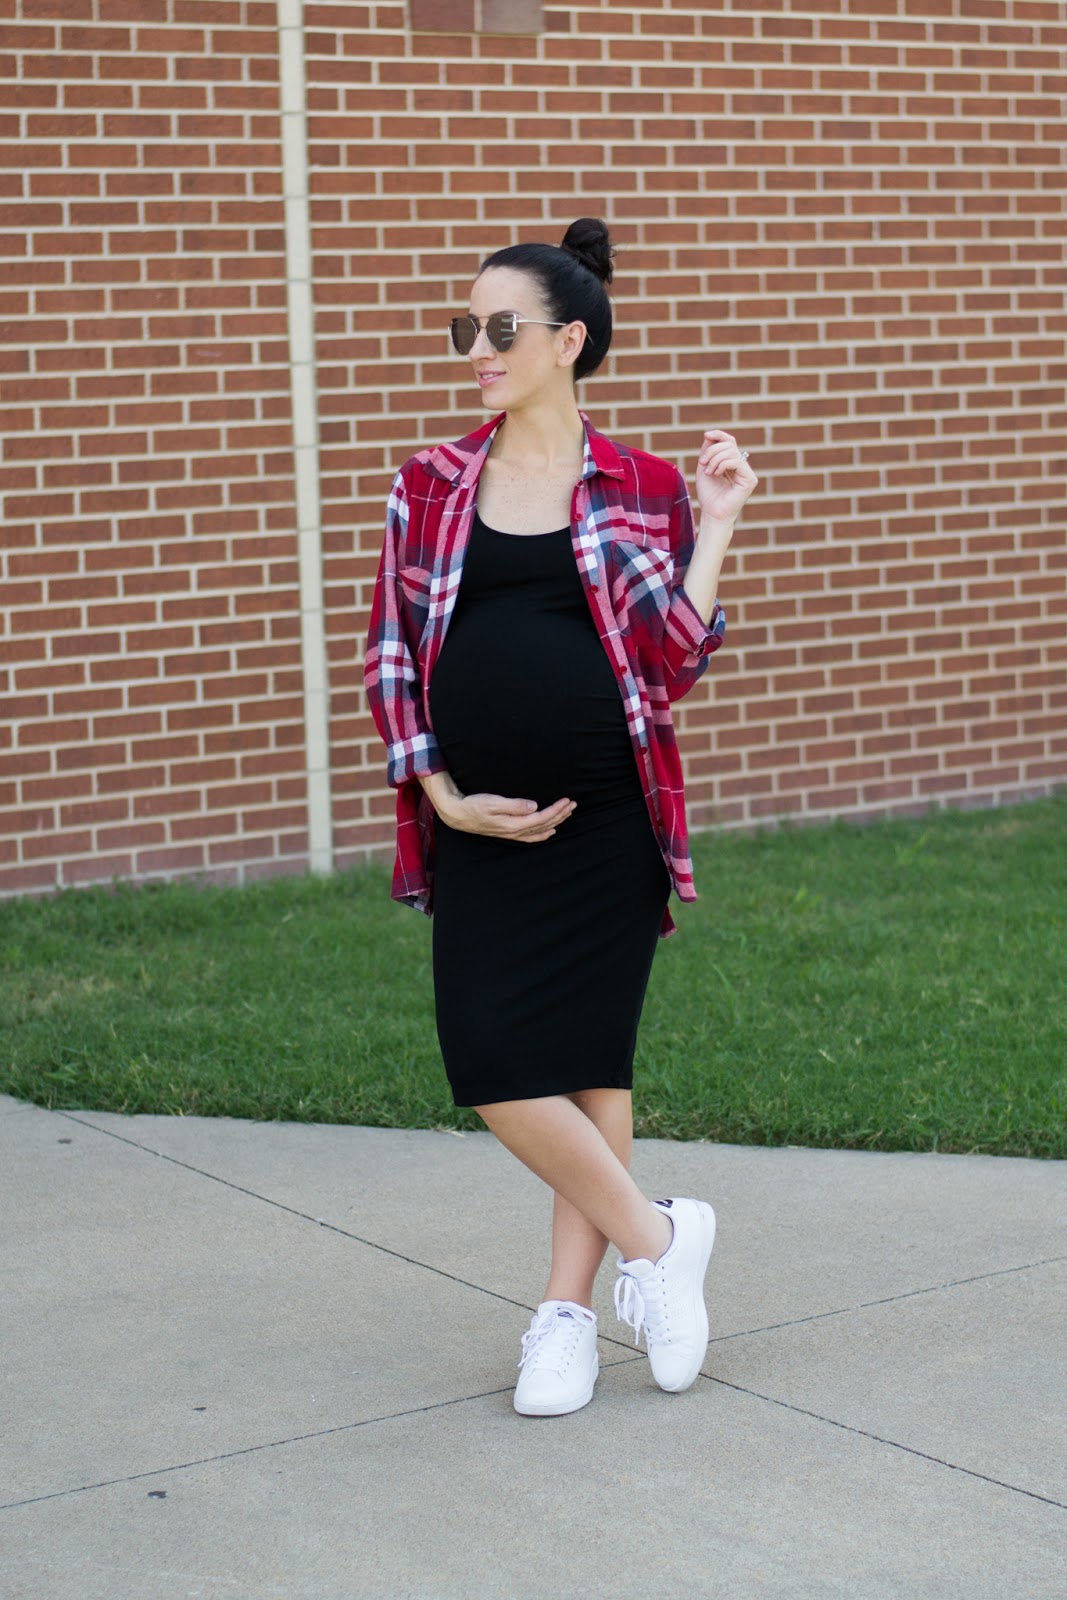 Casual maternity style in body con dress, sneakers and plaid shirt